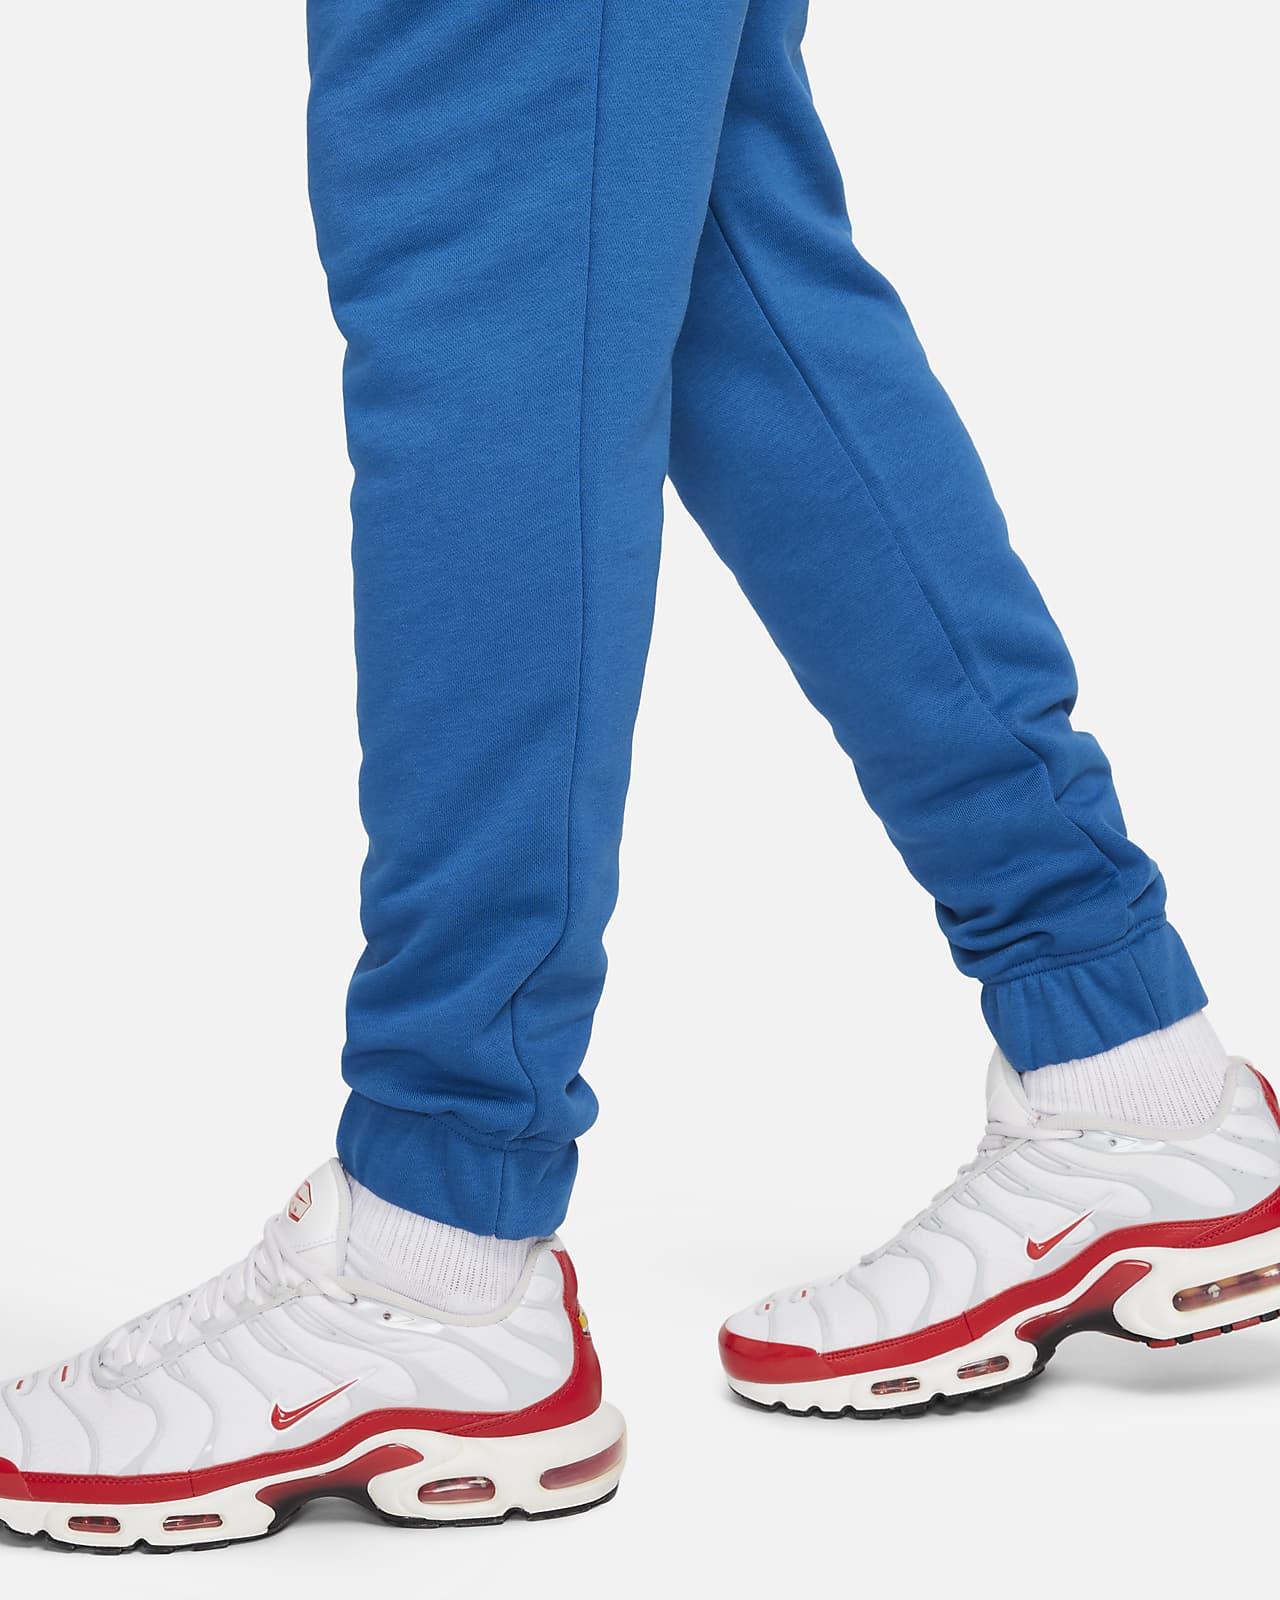 Nike Air Men's French Terry Joggers. Nike VN